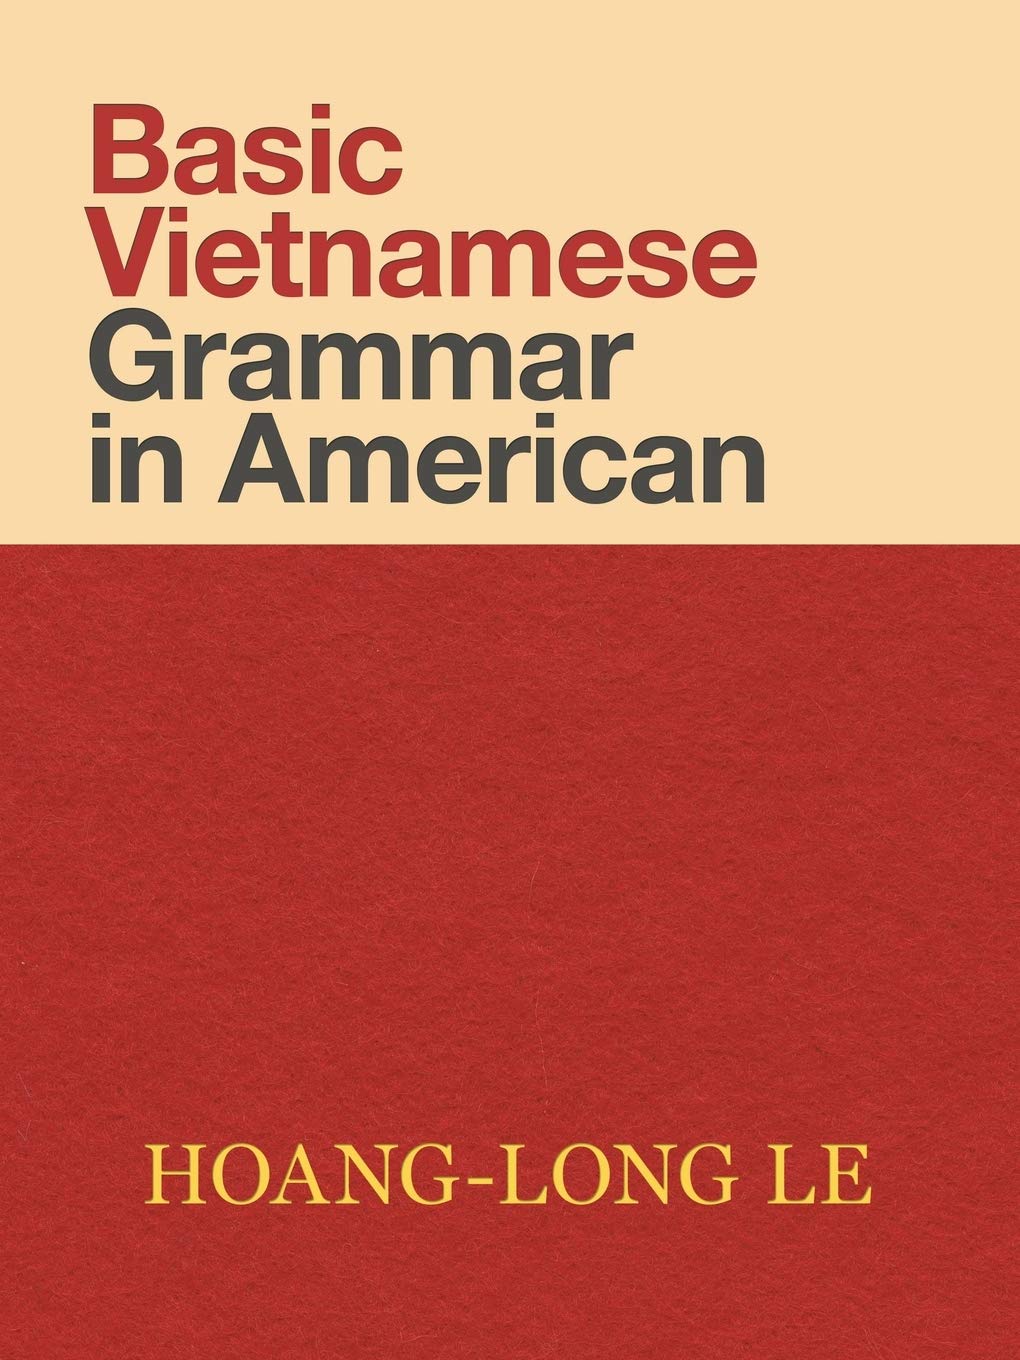 Author's Tranquility Press, Hoang-Long Le Teaches Vietnamese In Basic Vietnamese Grammar in American